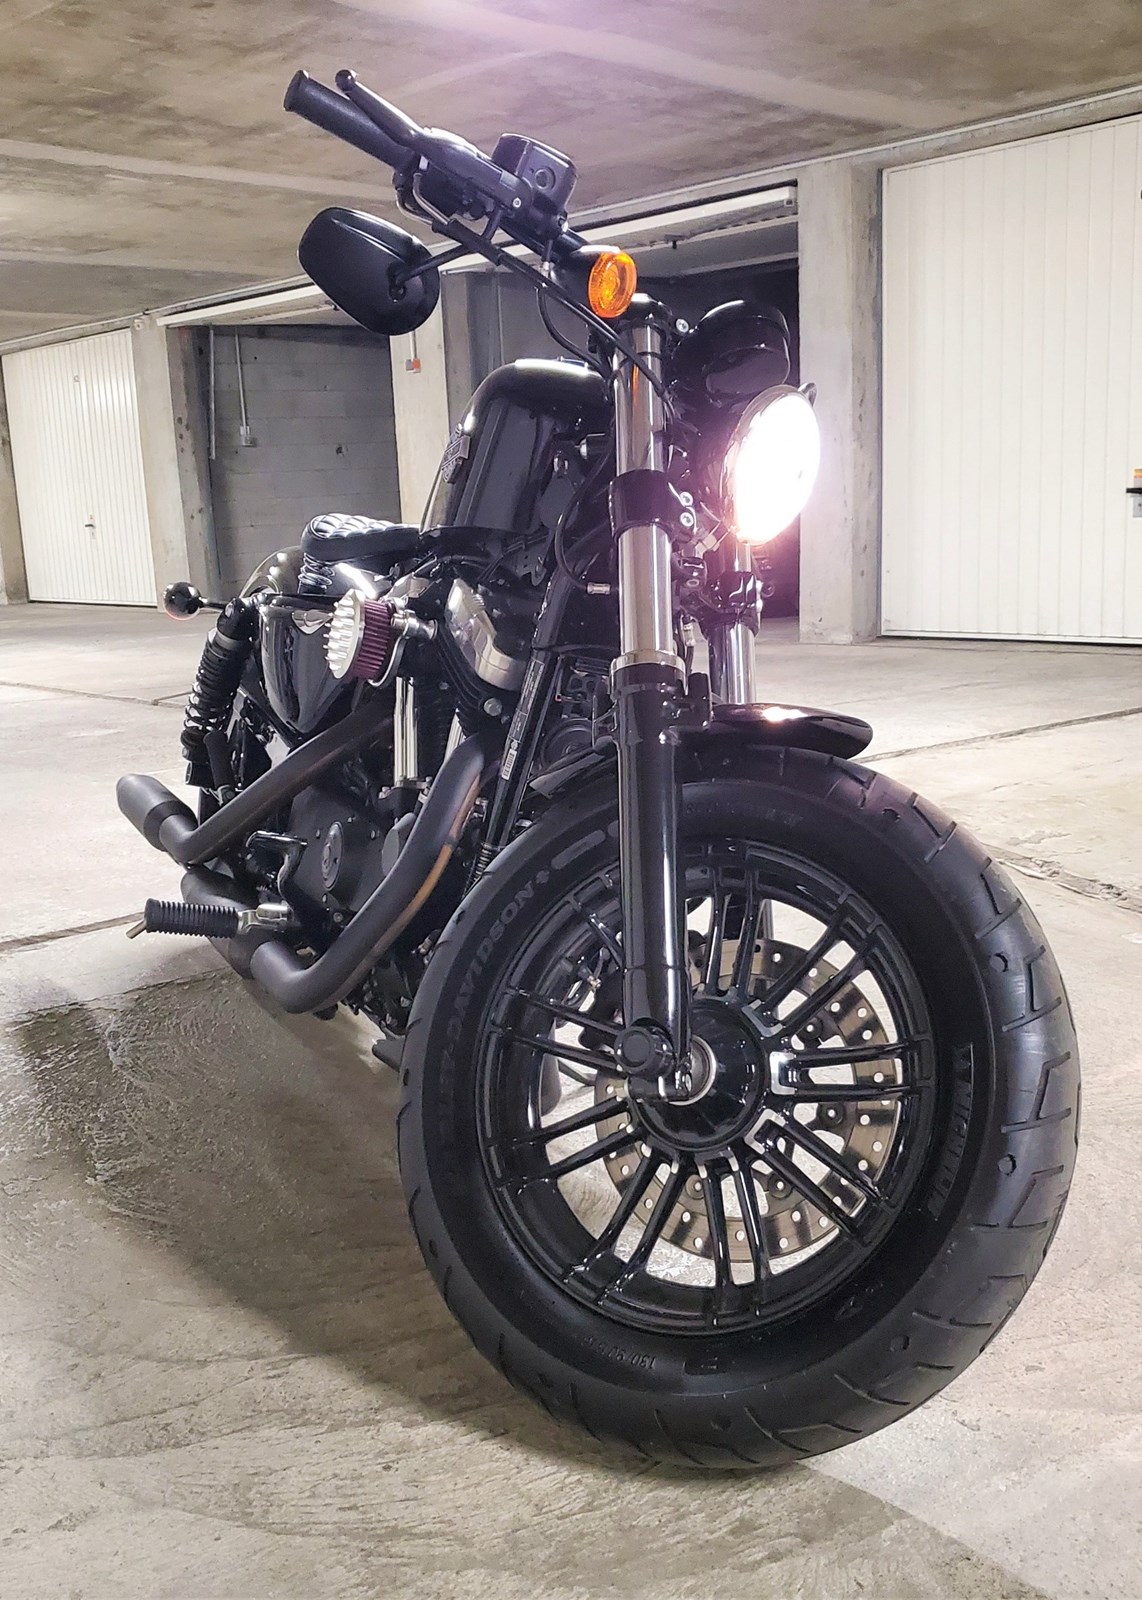 HARLEY-DAVIDSON XL 1200 X Forty Eight ABS